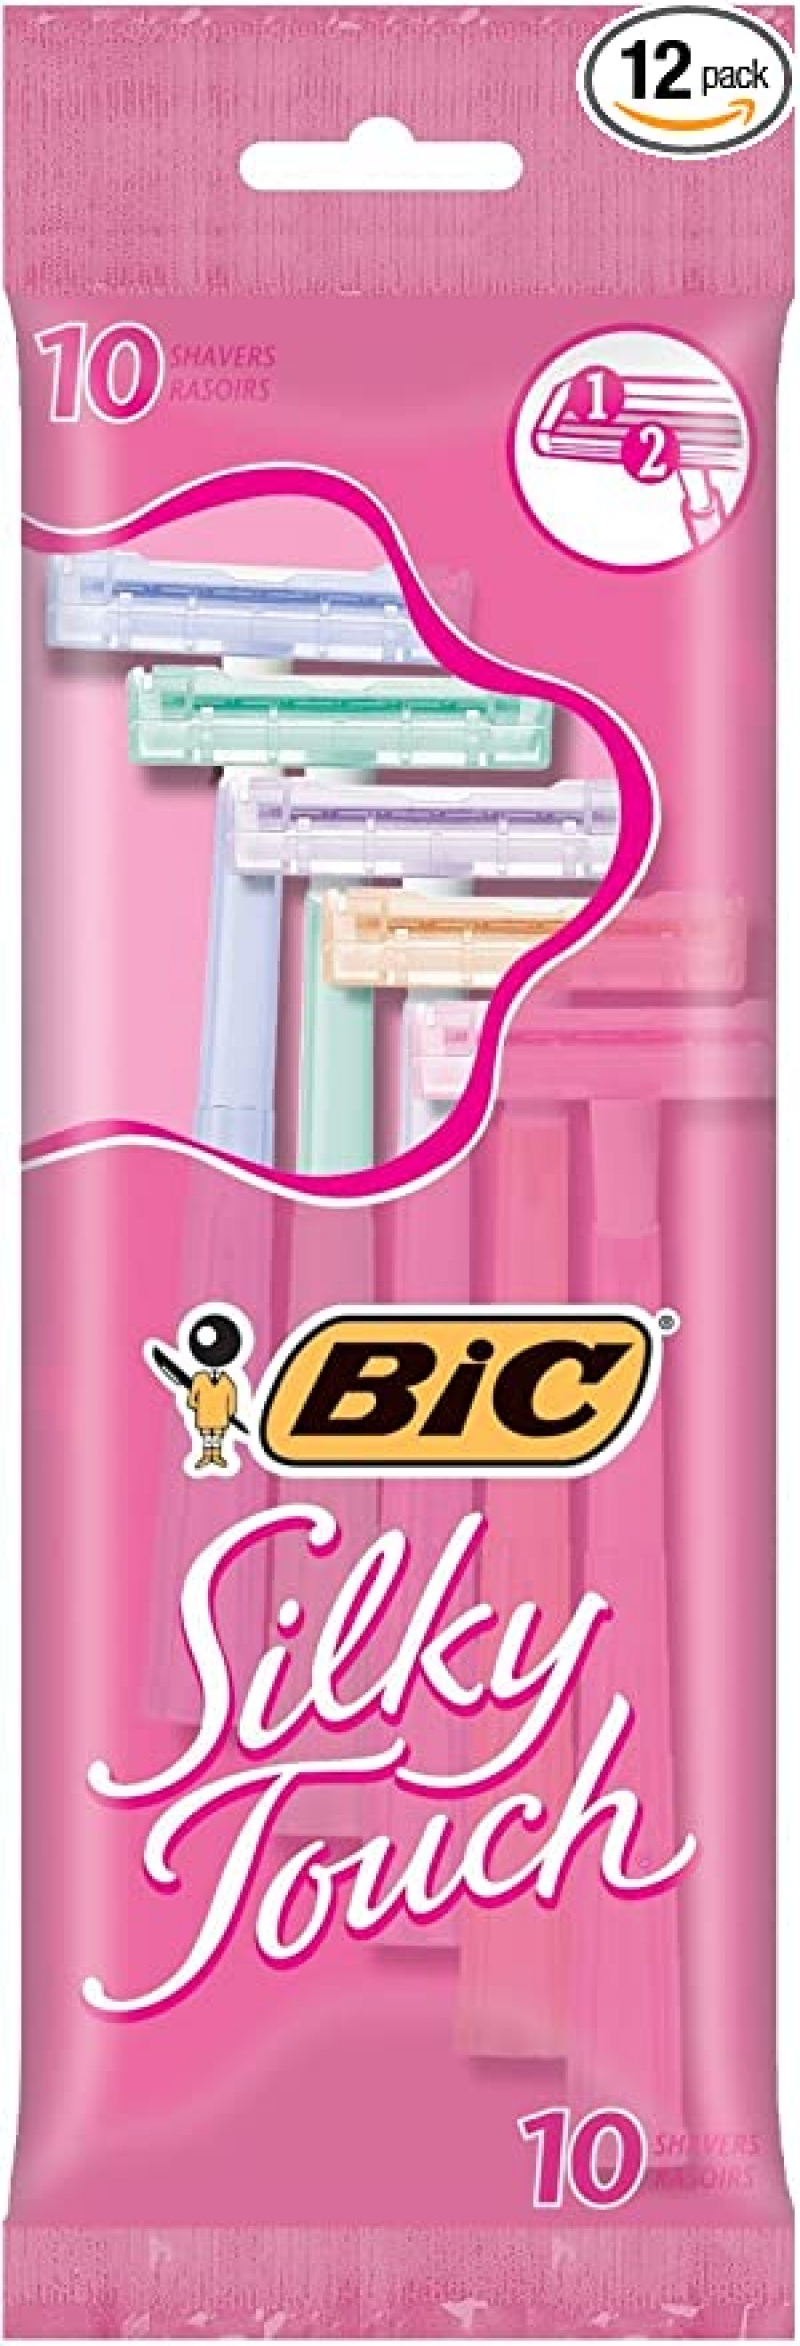 ihocon: BIC Silky Touch Women's Twin Blade Disposable Razor, 10 Count - Pack of 12 (120 Razors)  女士除毛刀